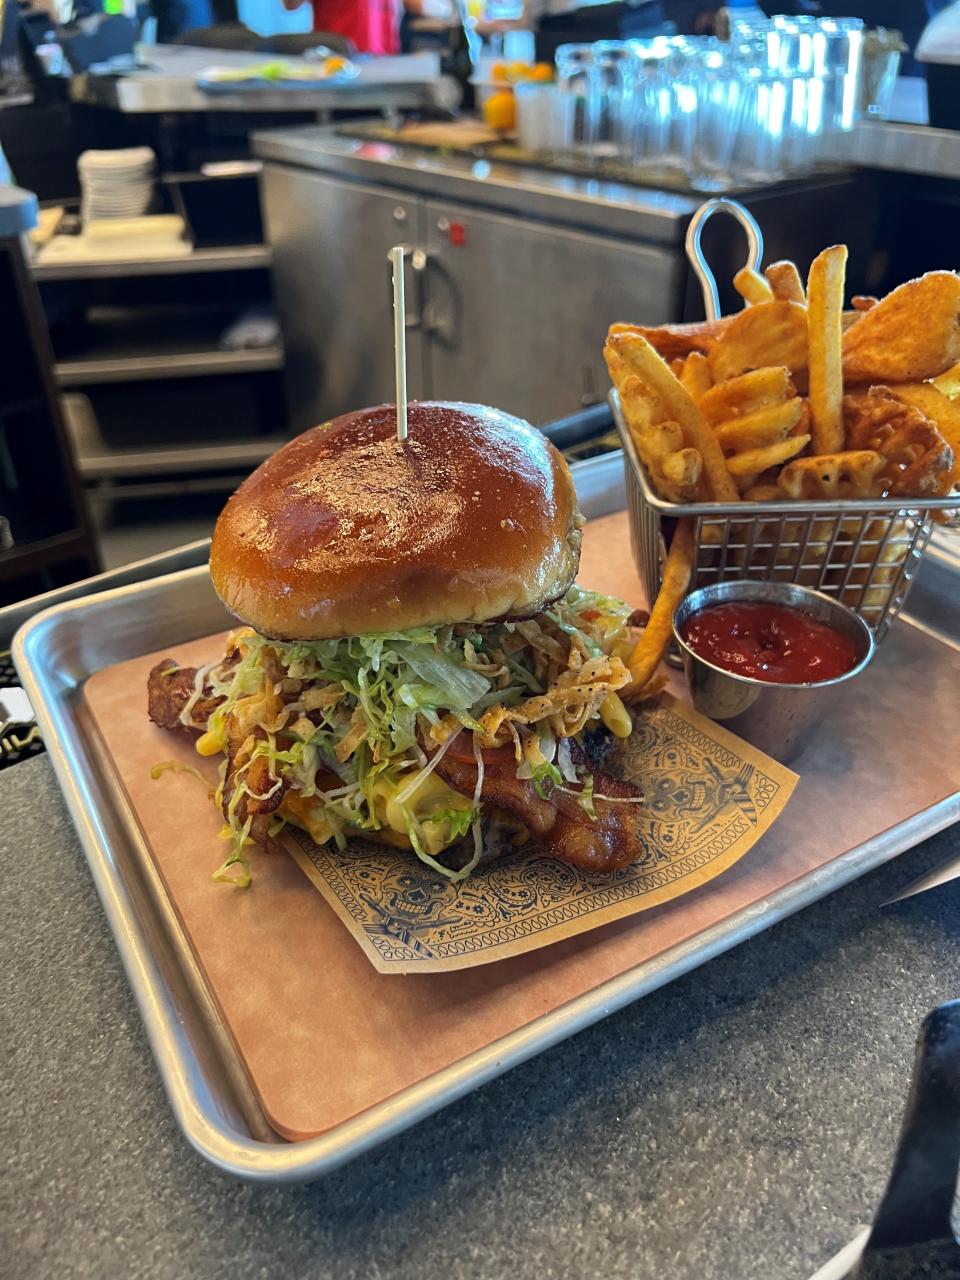 The Bacon Mac-N-Cheese Burger at Guy Fieri's Kitchen + Bar in Council Bluffs uses six cheeses, a smashed burger, bacon and garlic-buttered whole wheat buns.